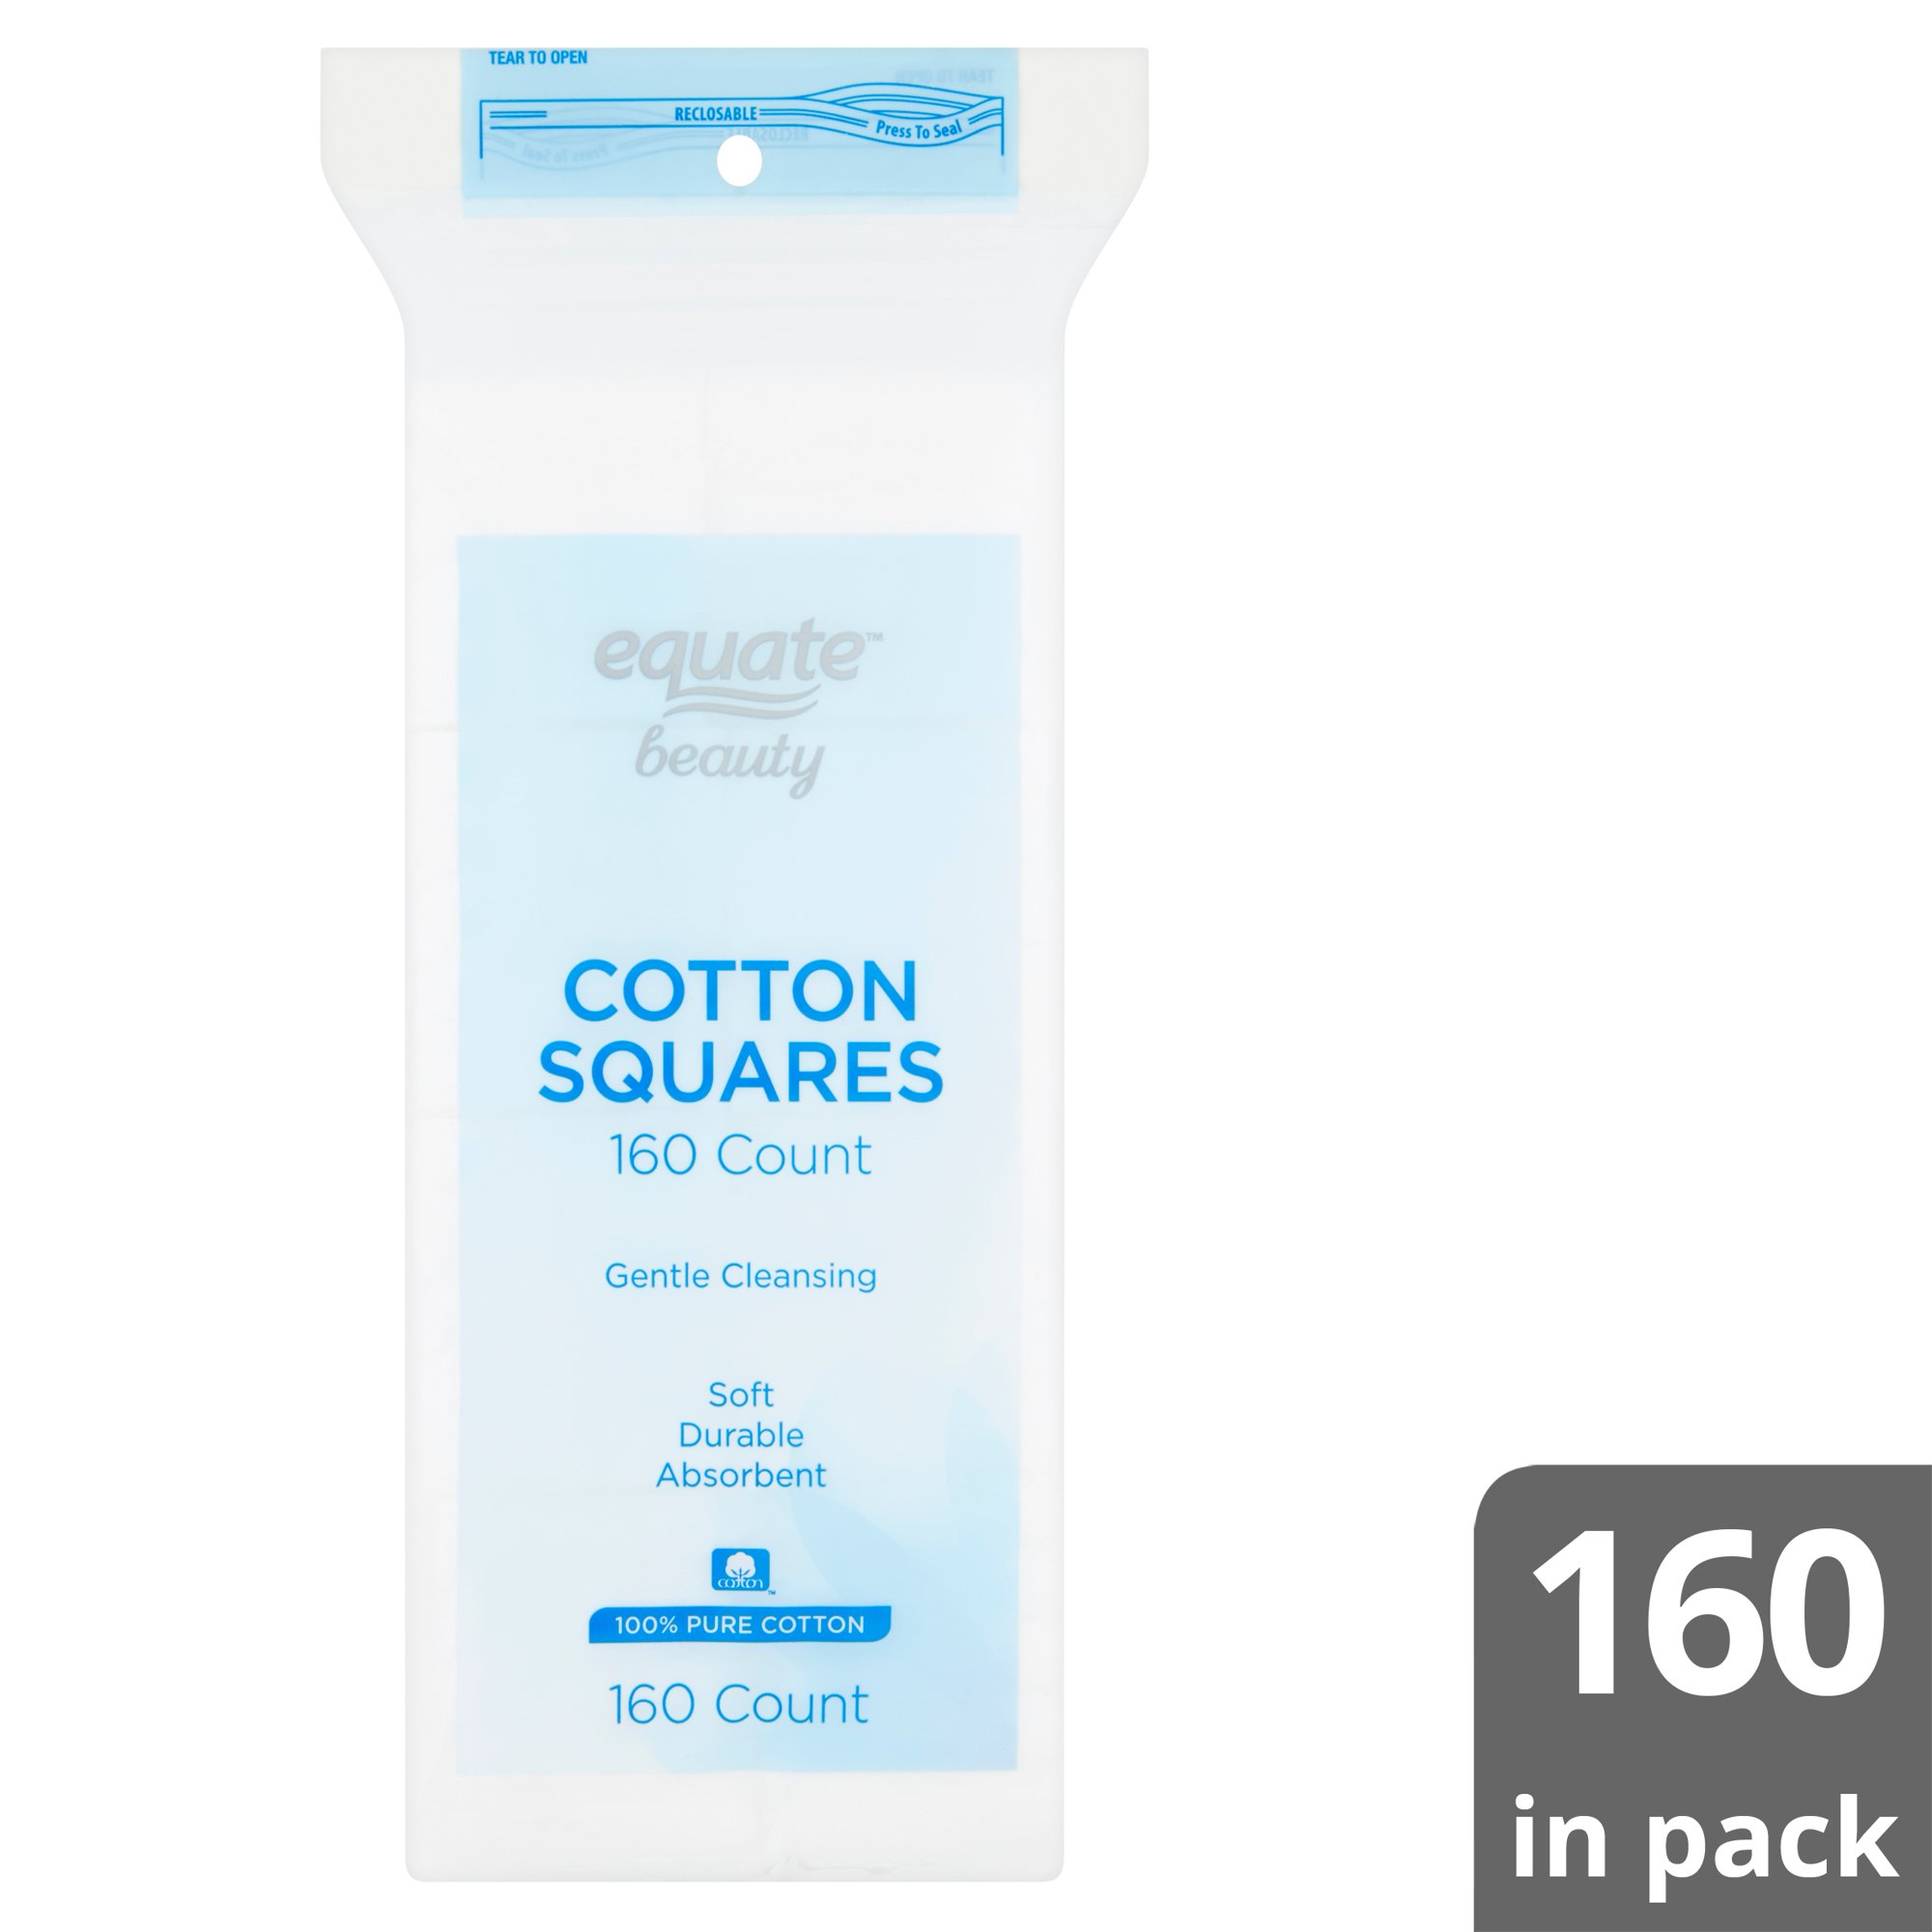 Equate Beauty Cotton Squares化妆棉, 160 count